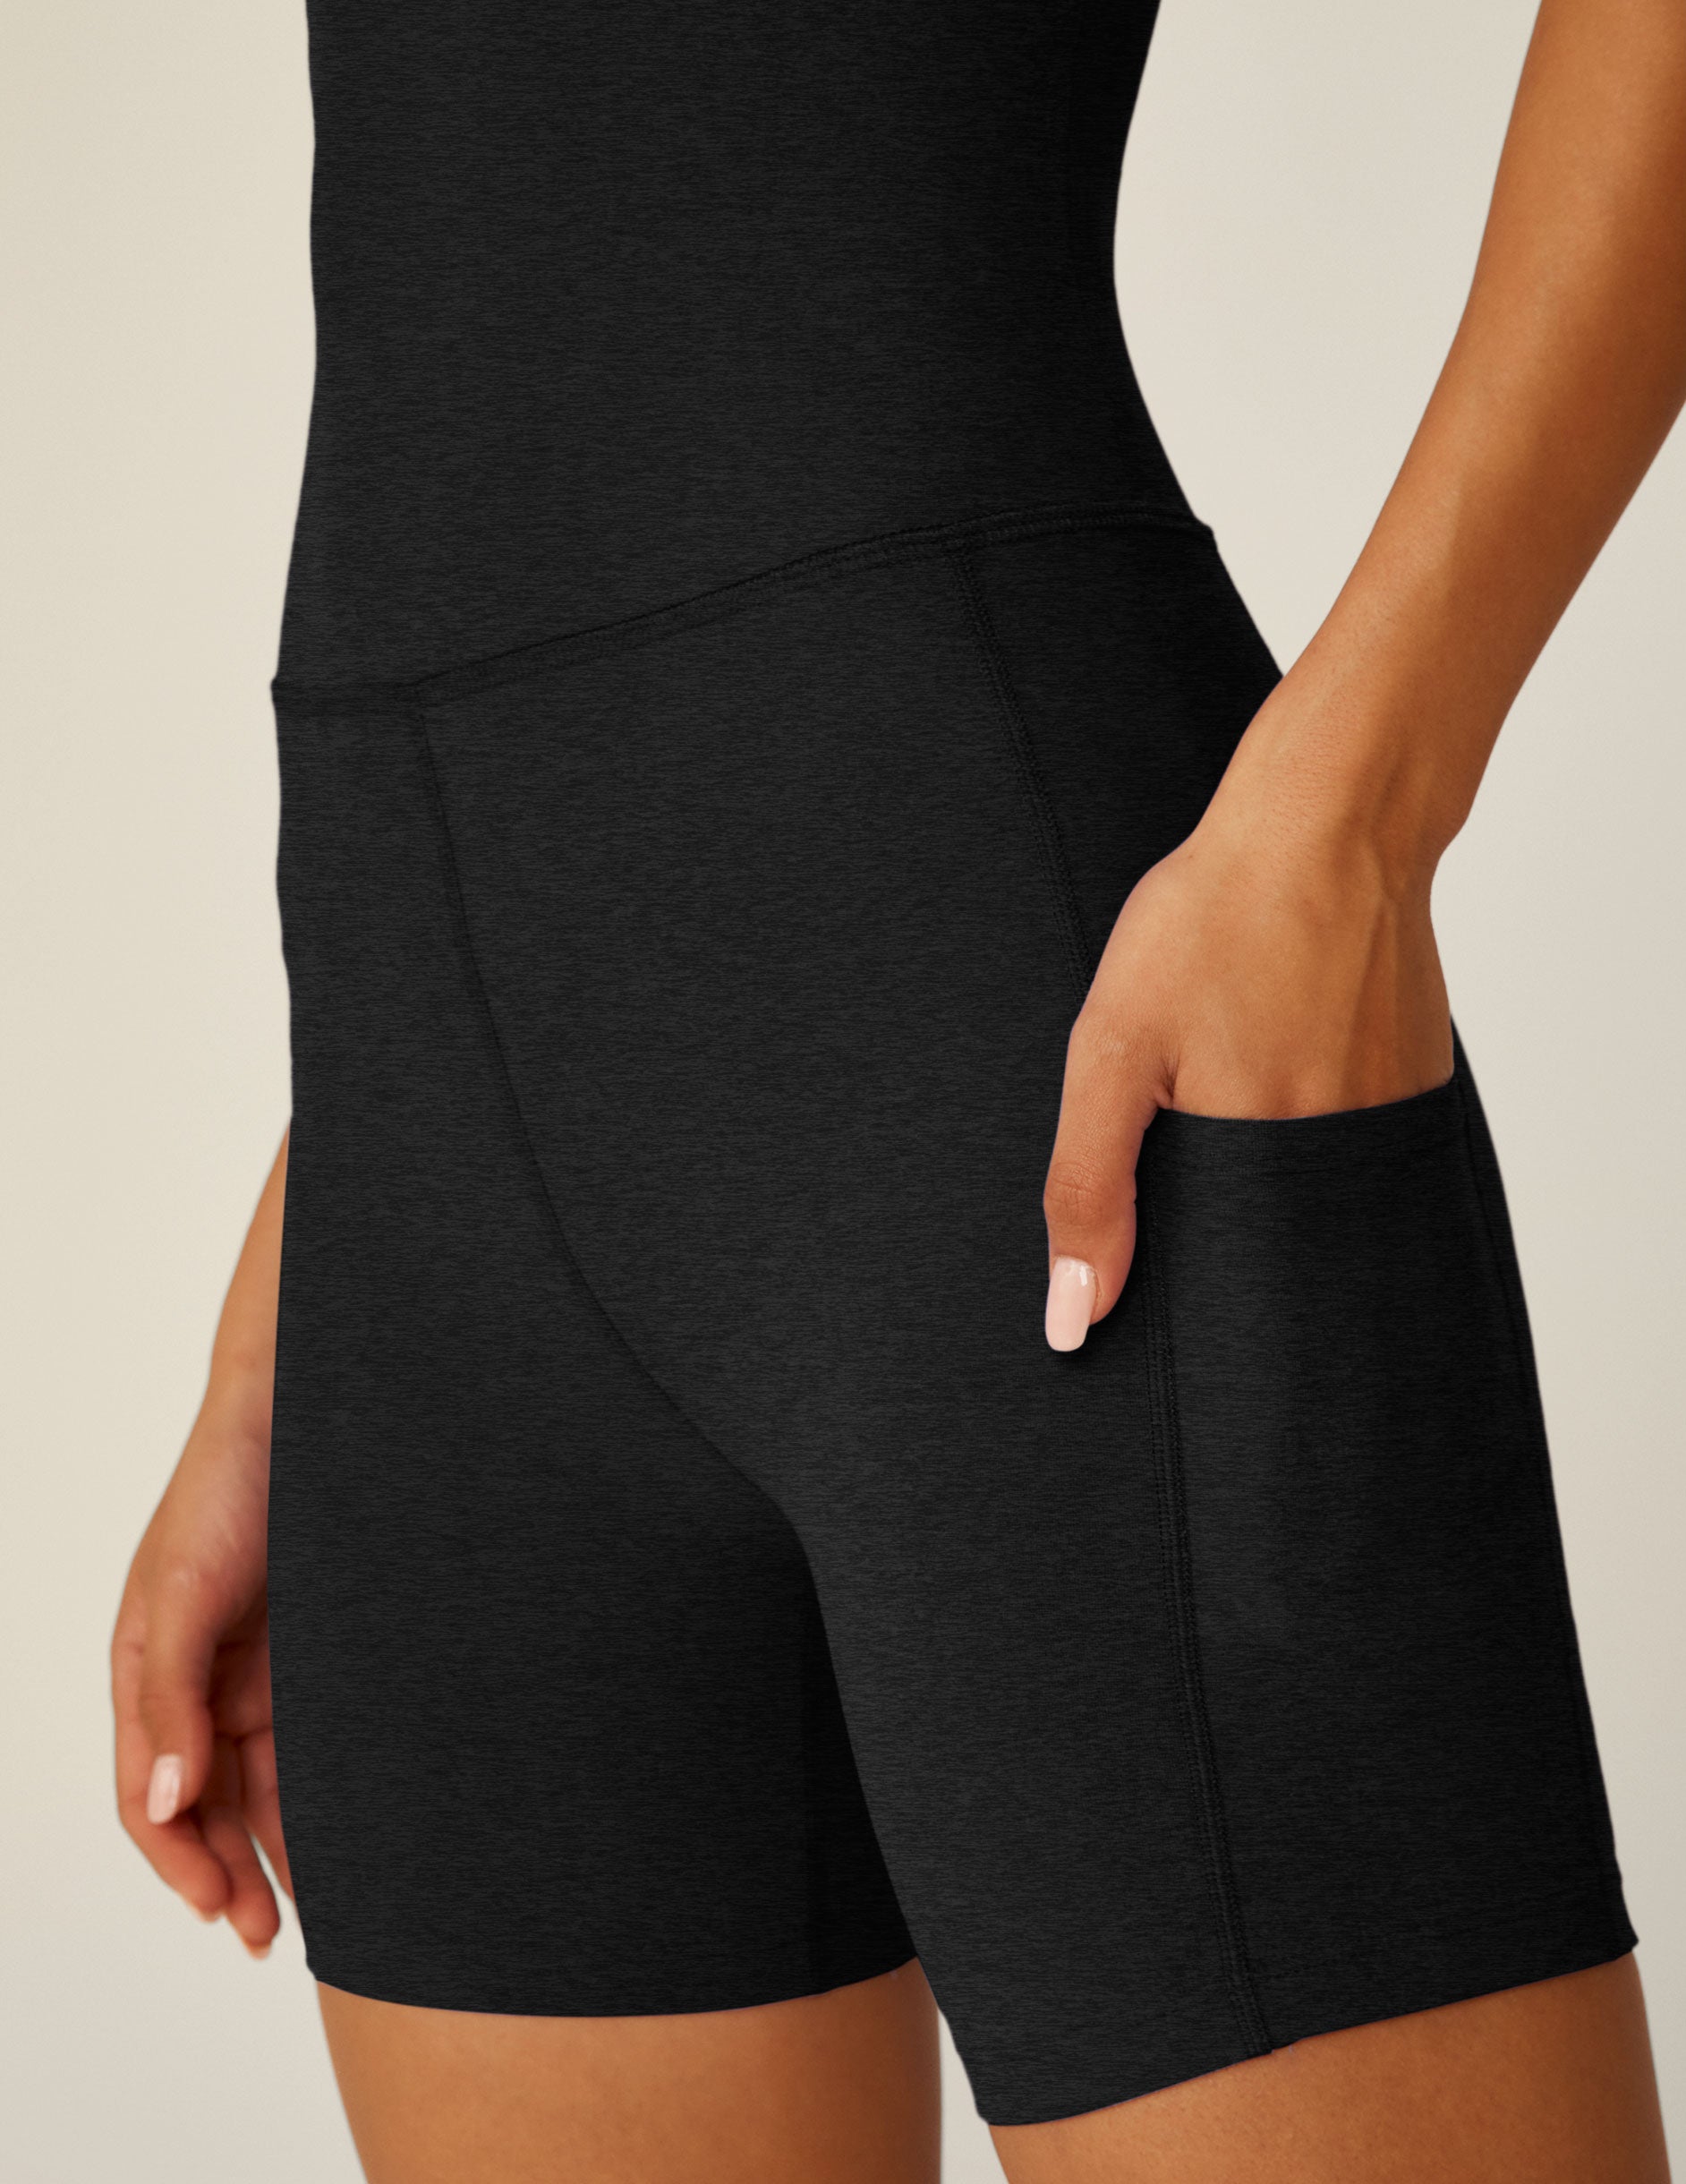 black biker jumpsuit with a crossover strap detail in the back and pockets. 